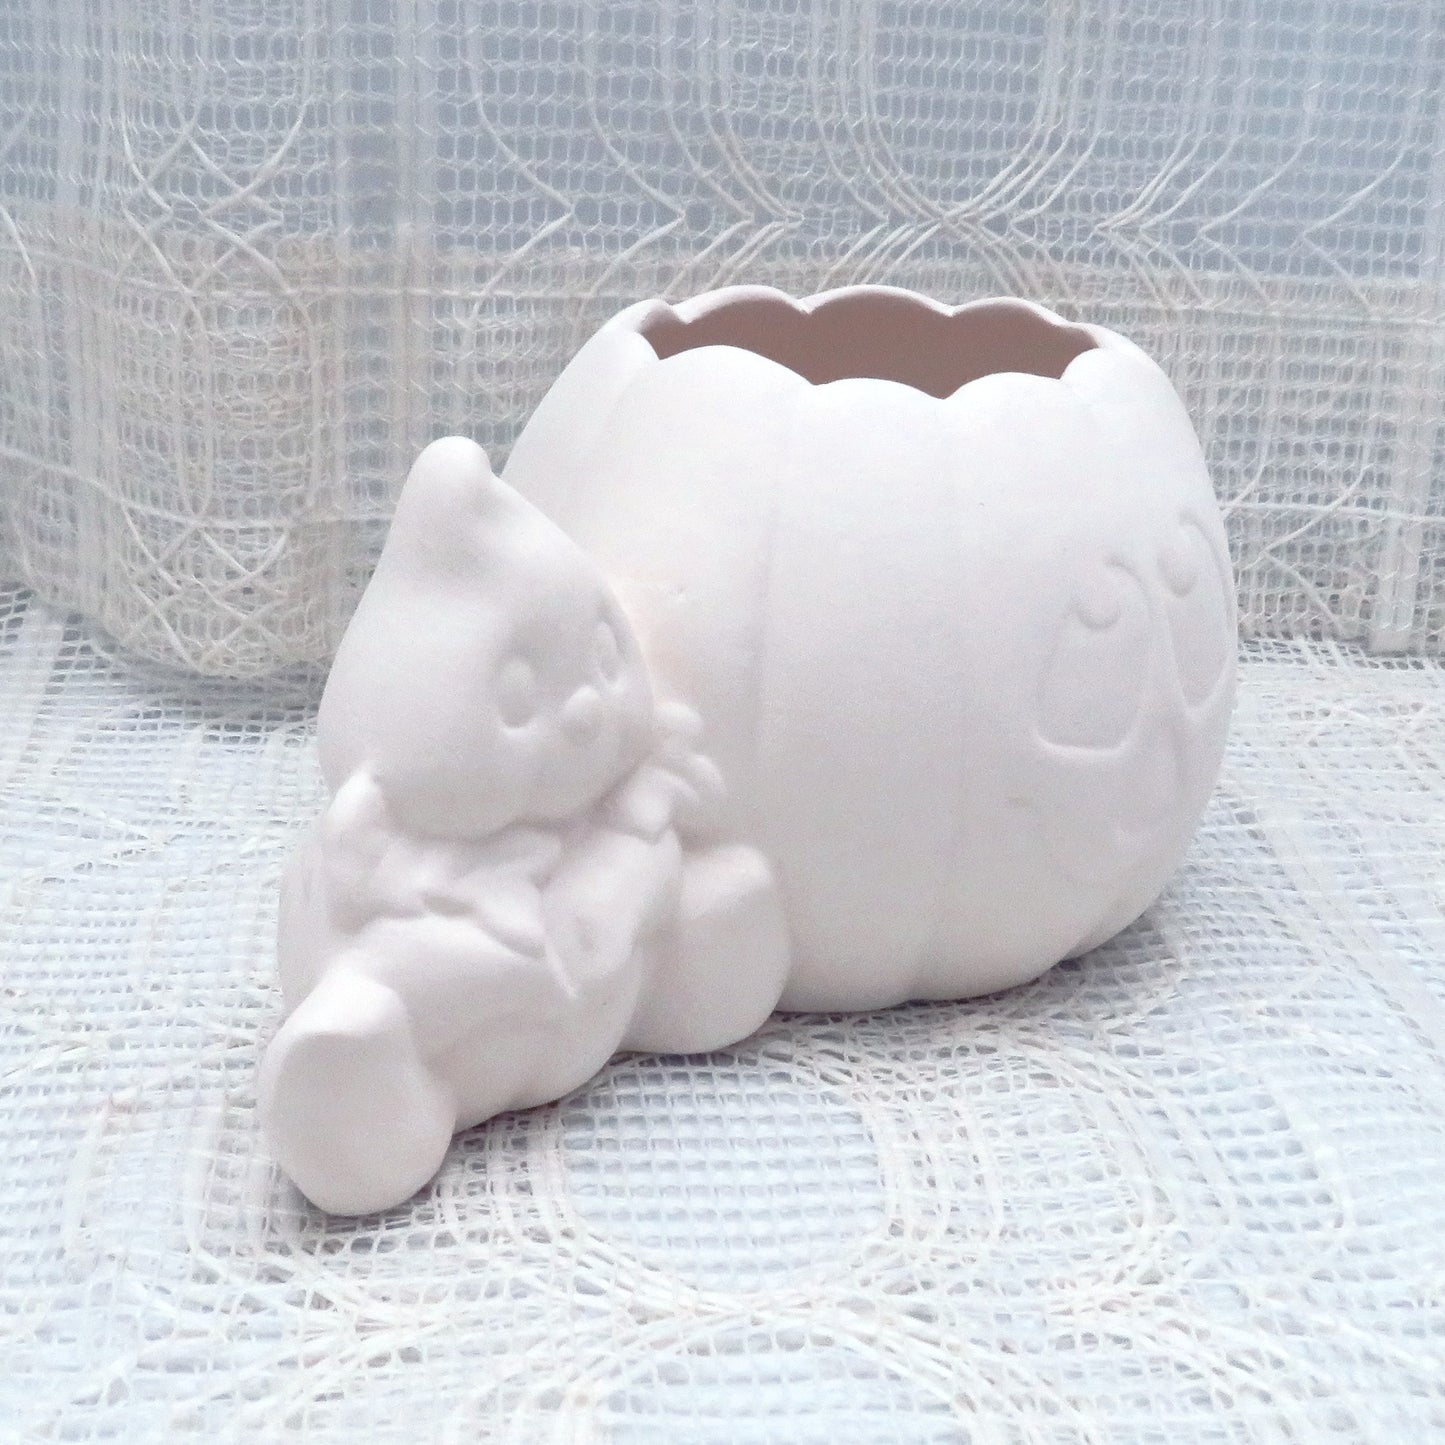 Unpainted Ceramic Bisque Pumpkin and Ghost for Halloween Decor